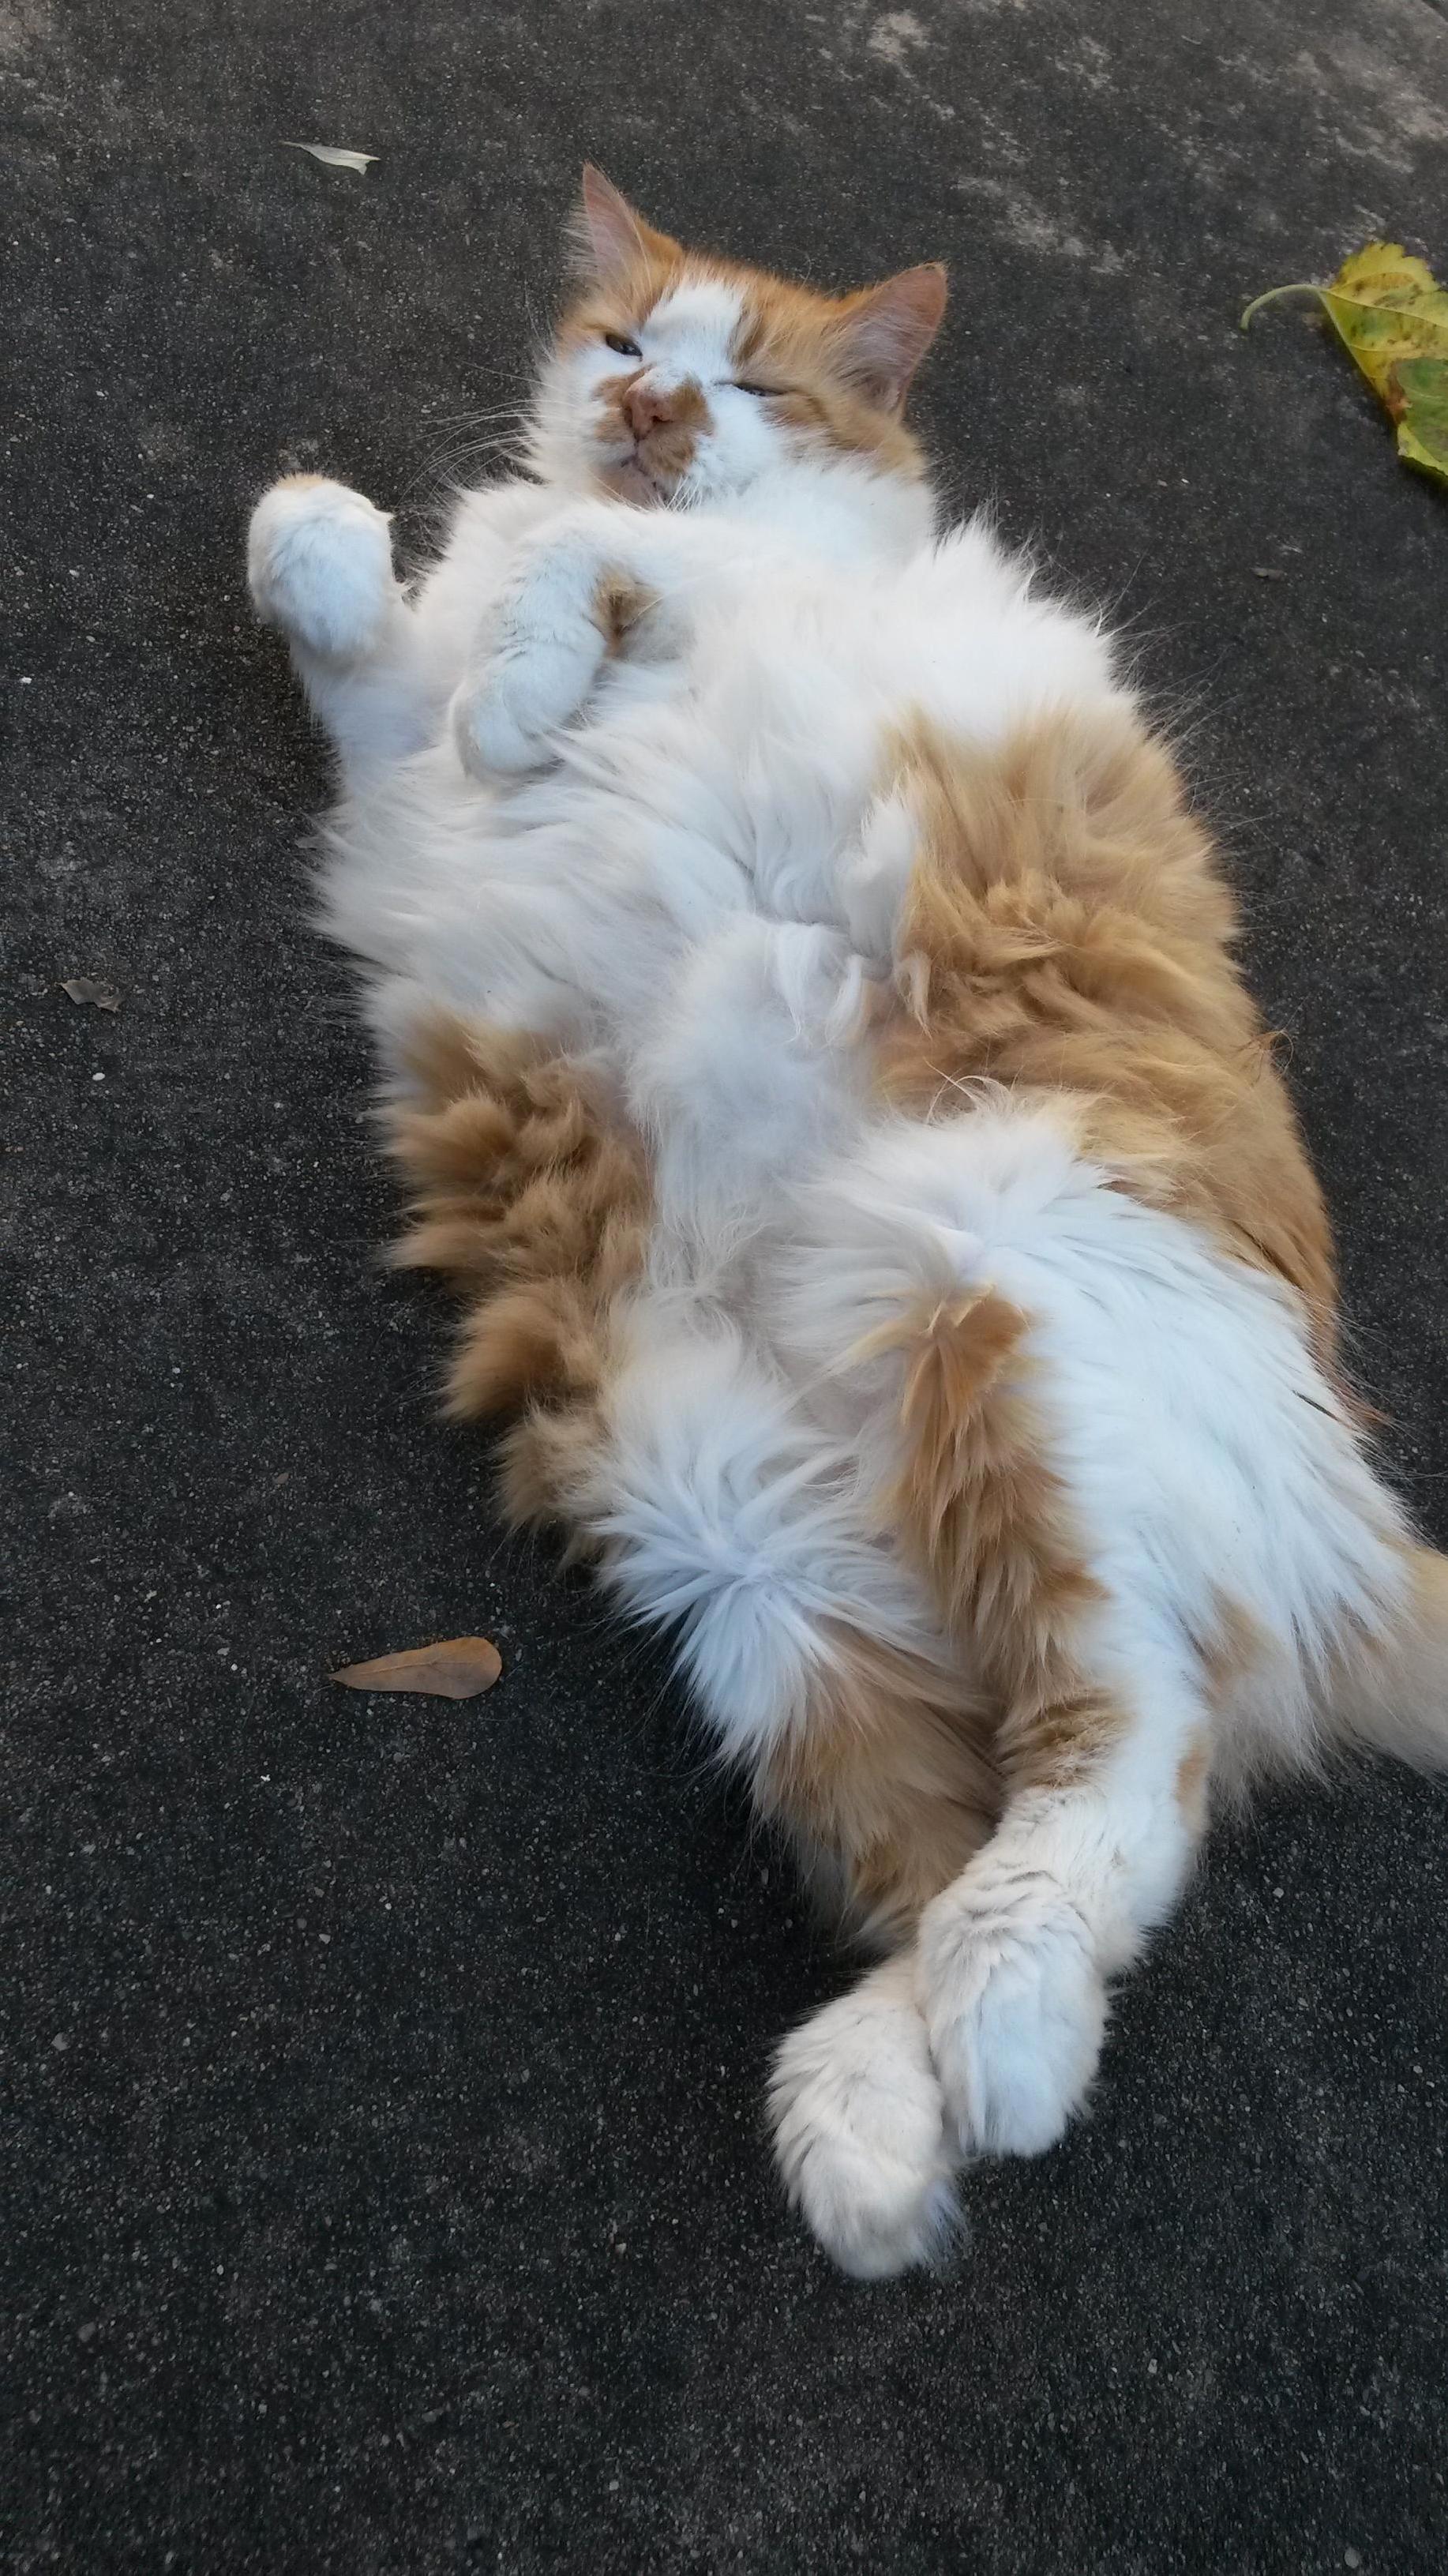 Floof beans and bellyrubs what more could i ever ask in a cat